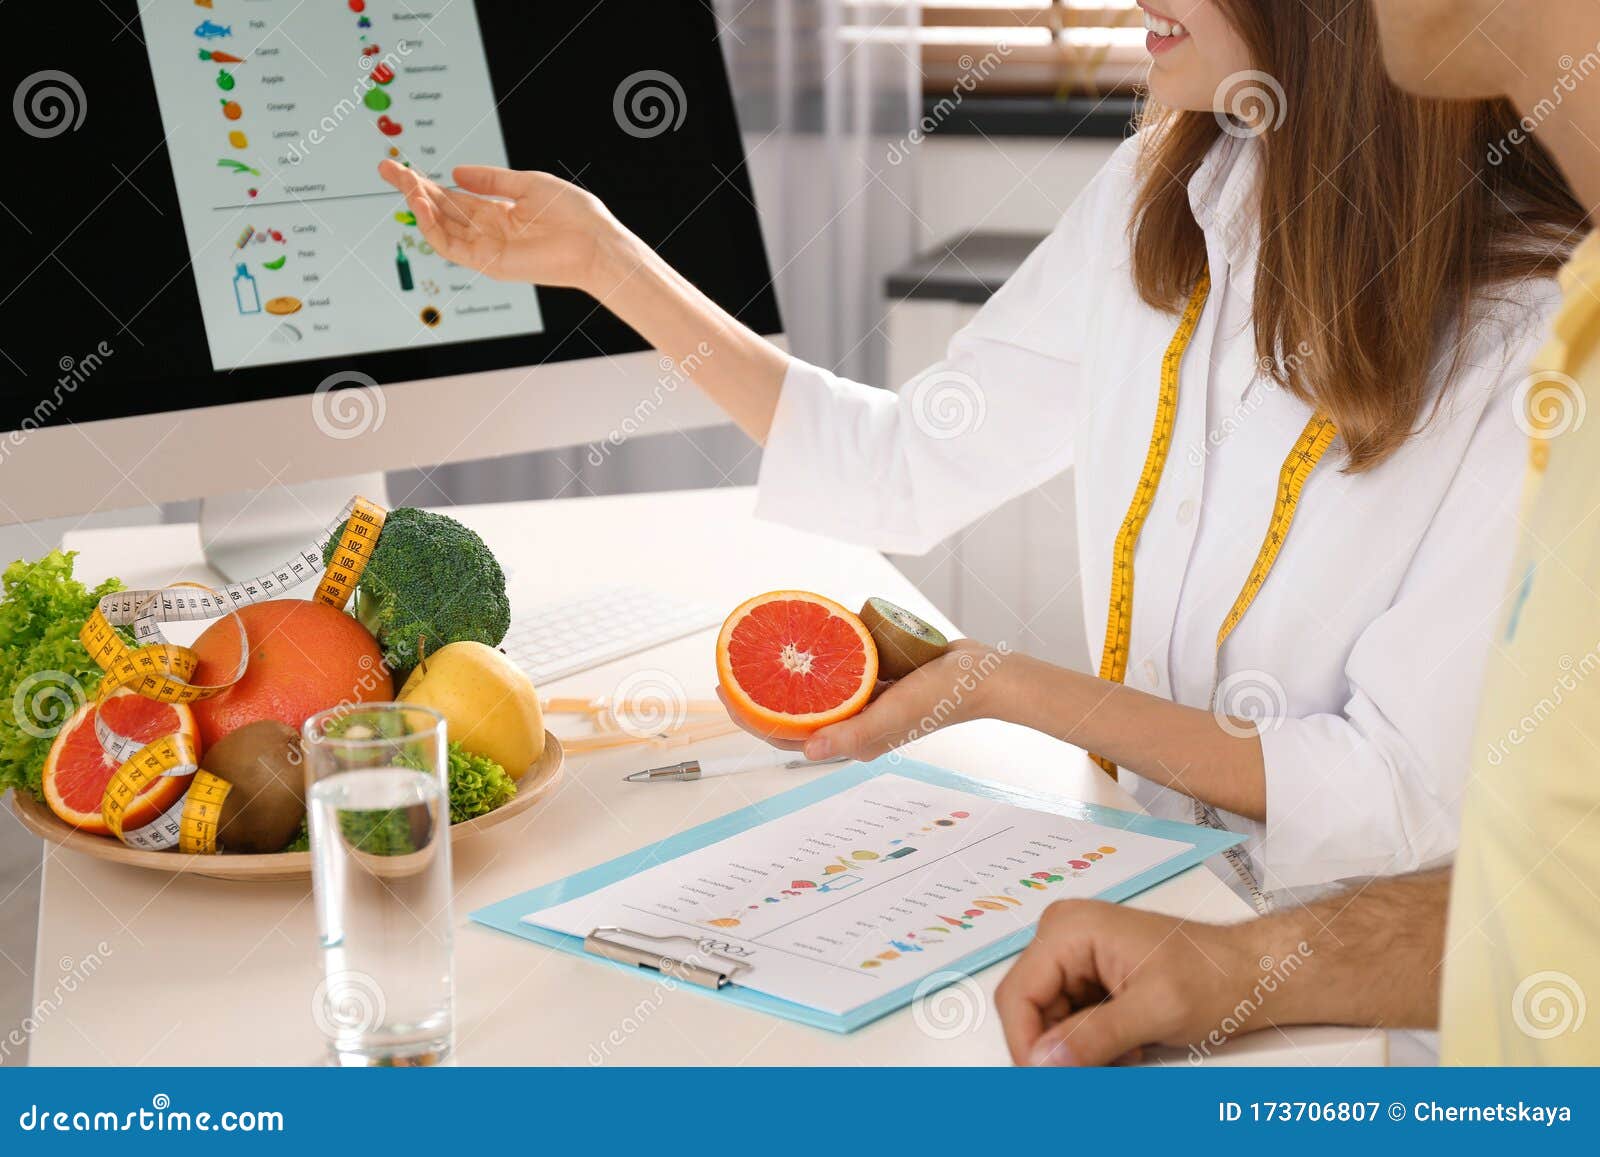 young nutritionist consulting patient at table in clinic